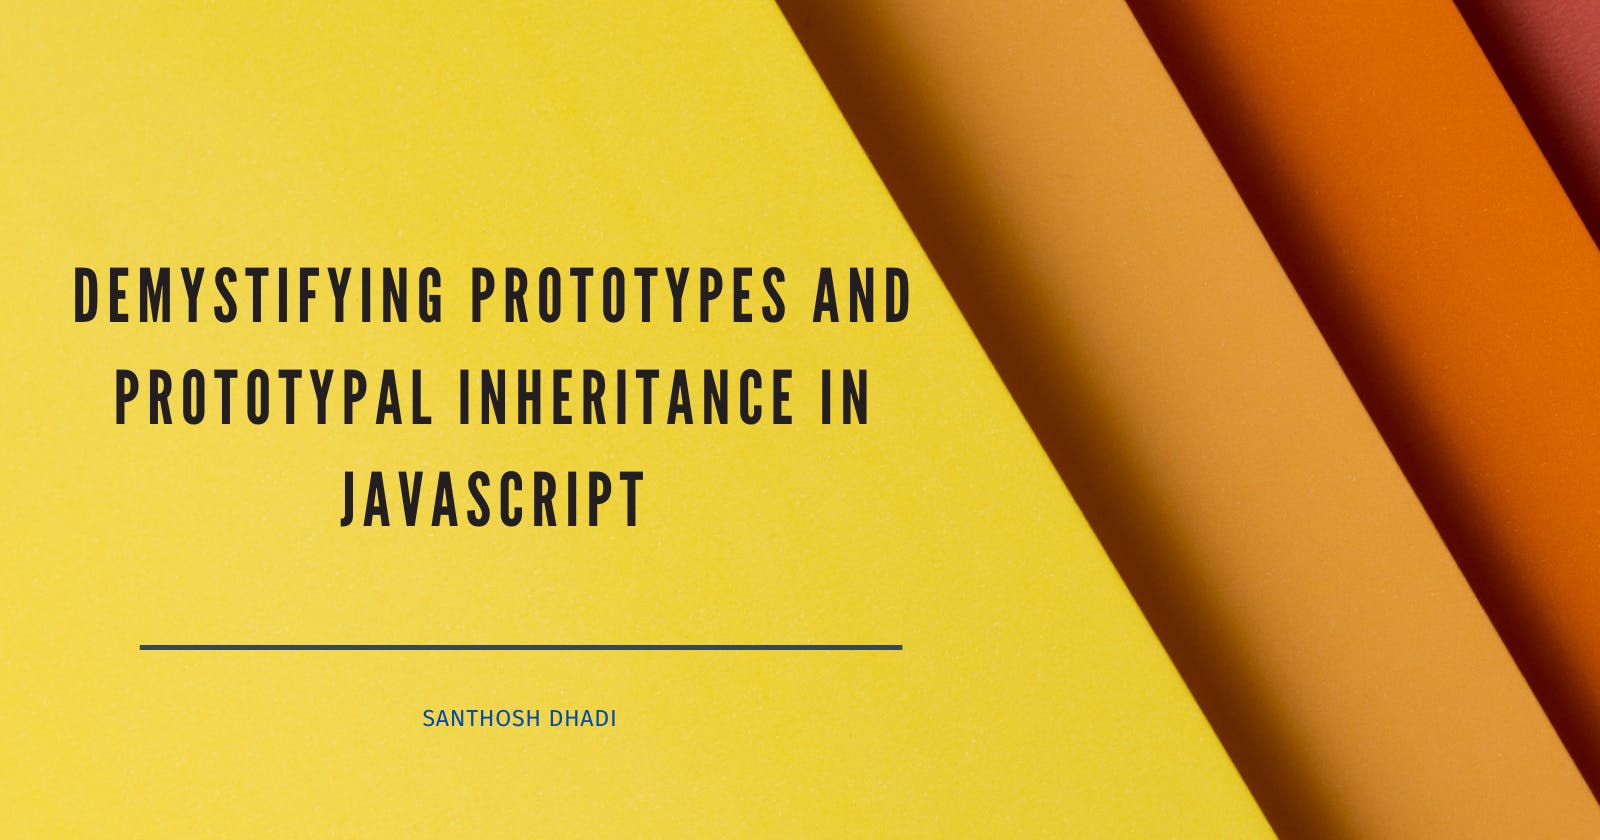 Demystifying Prototypes and Prototypal Inheritance in JavaScript